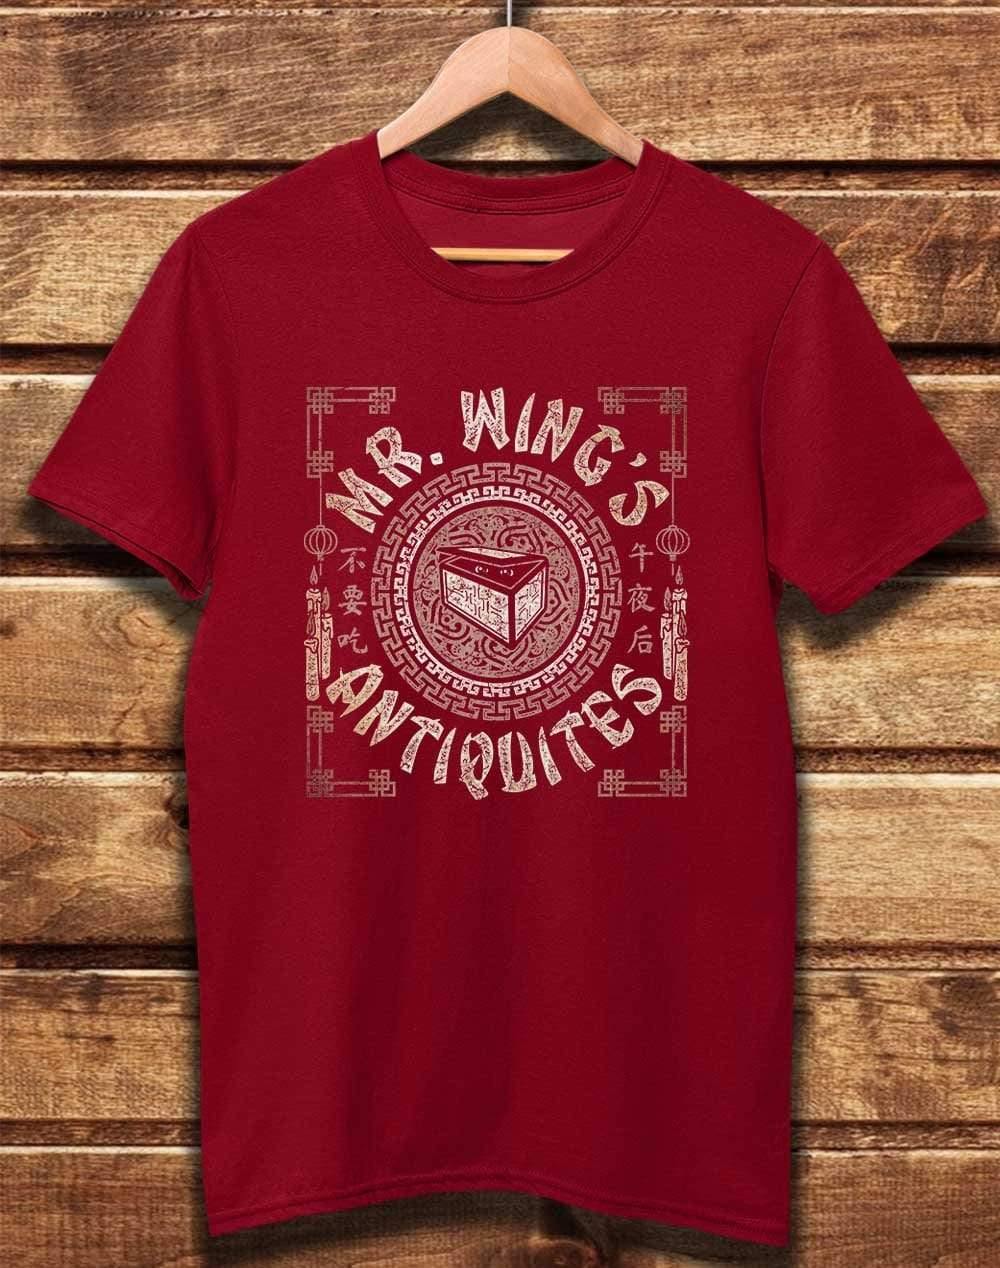 DELUXE Mr Wing's Antiquites Organic Cotton T-Shirt XS / Dark Red  - Off World Tees